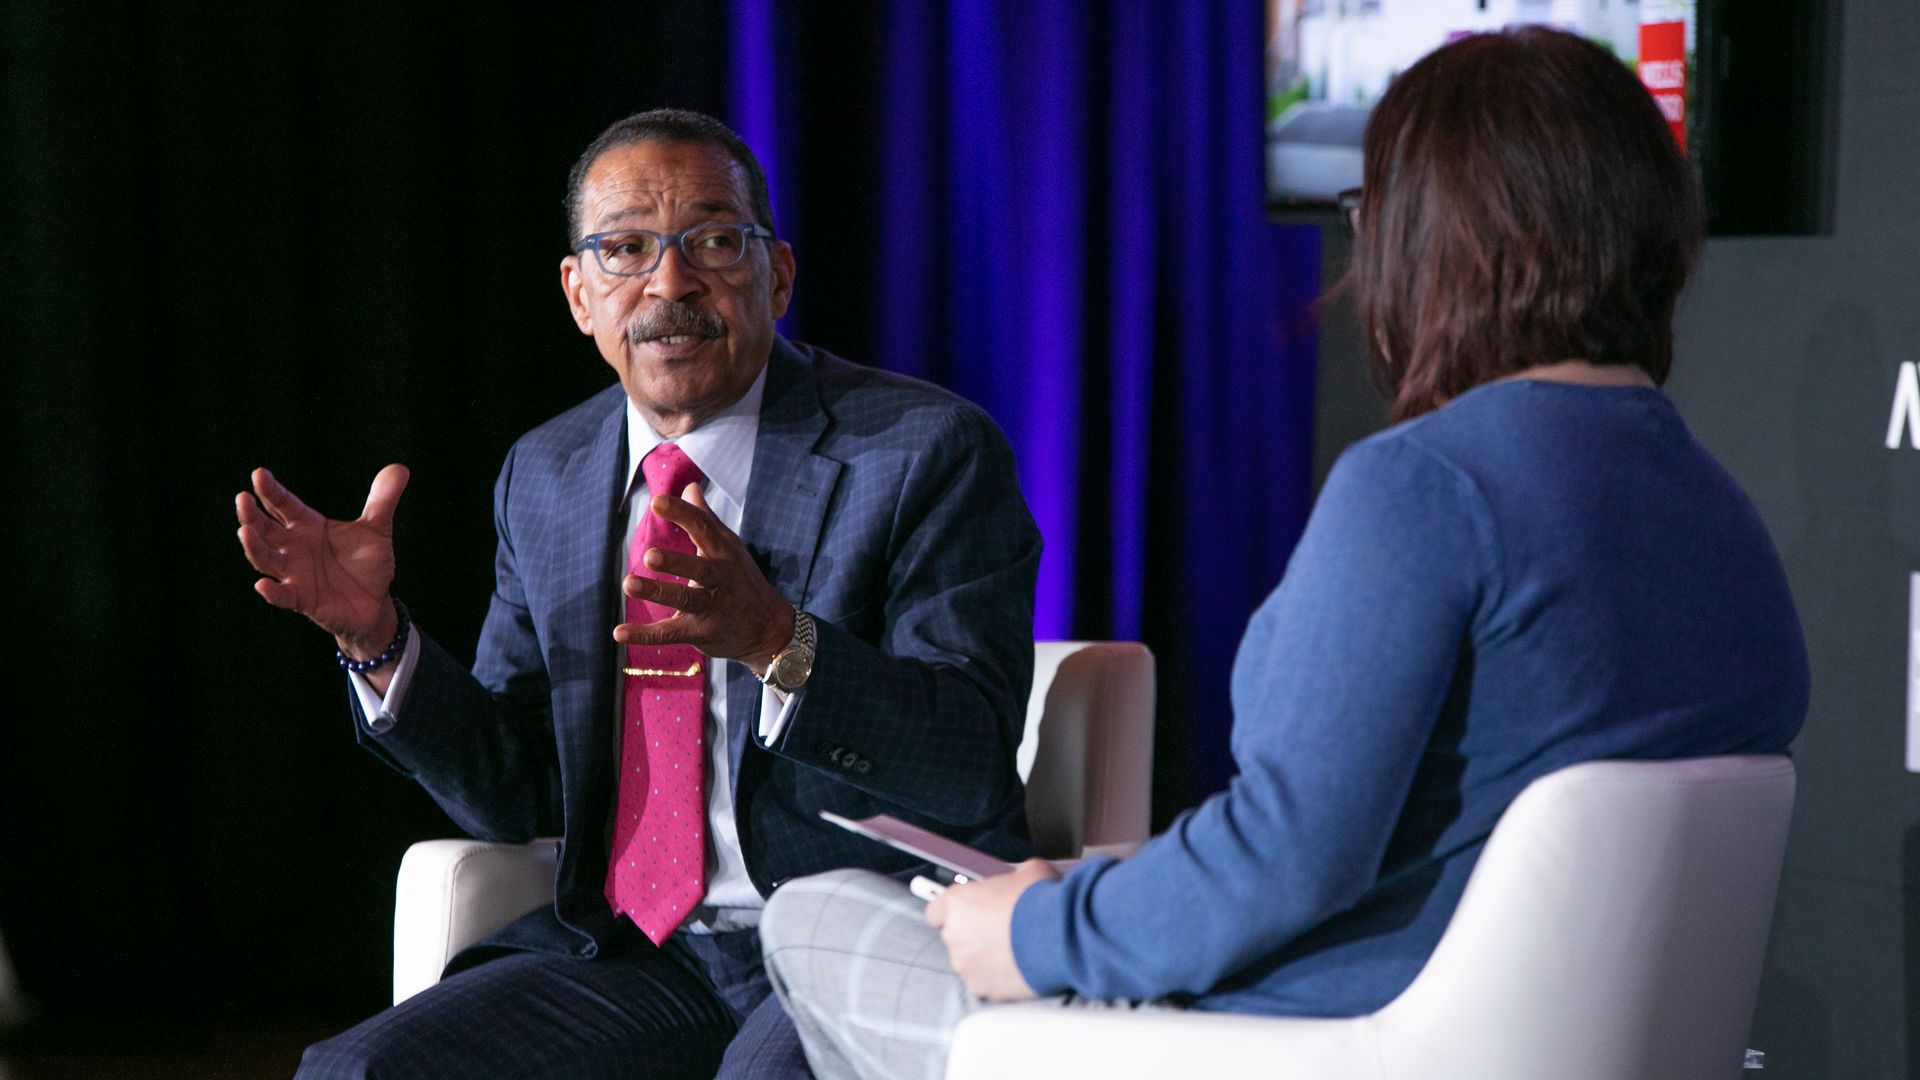 Mr. Herb J. Wesson, Jr. in conversation with Axios' Ina Fried.